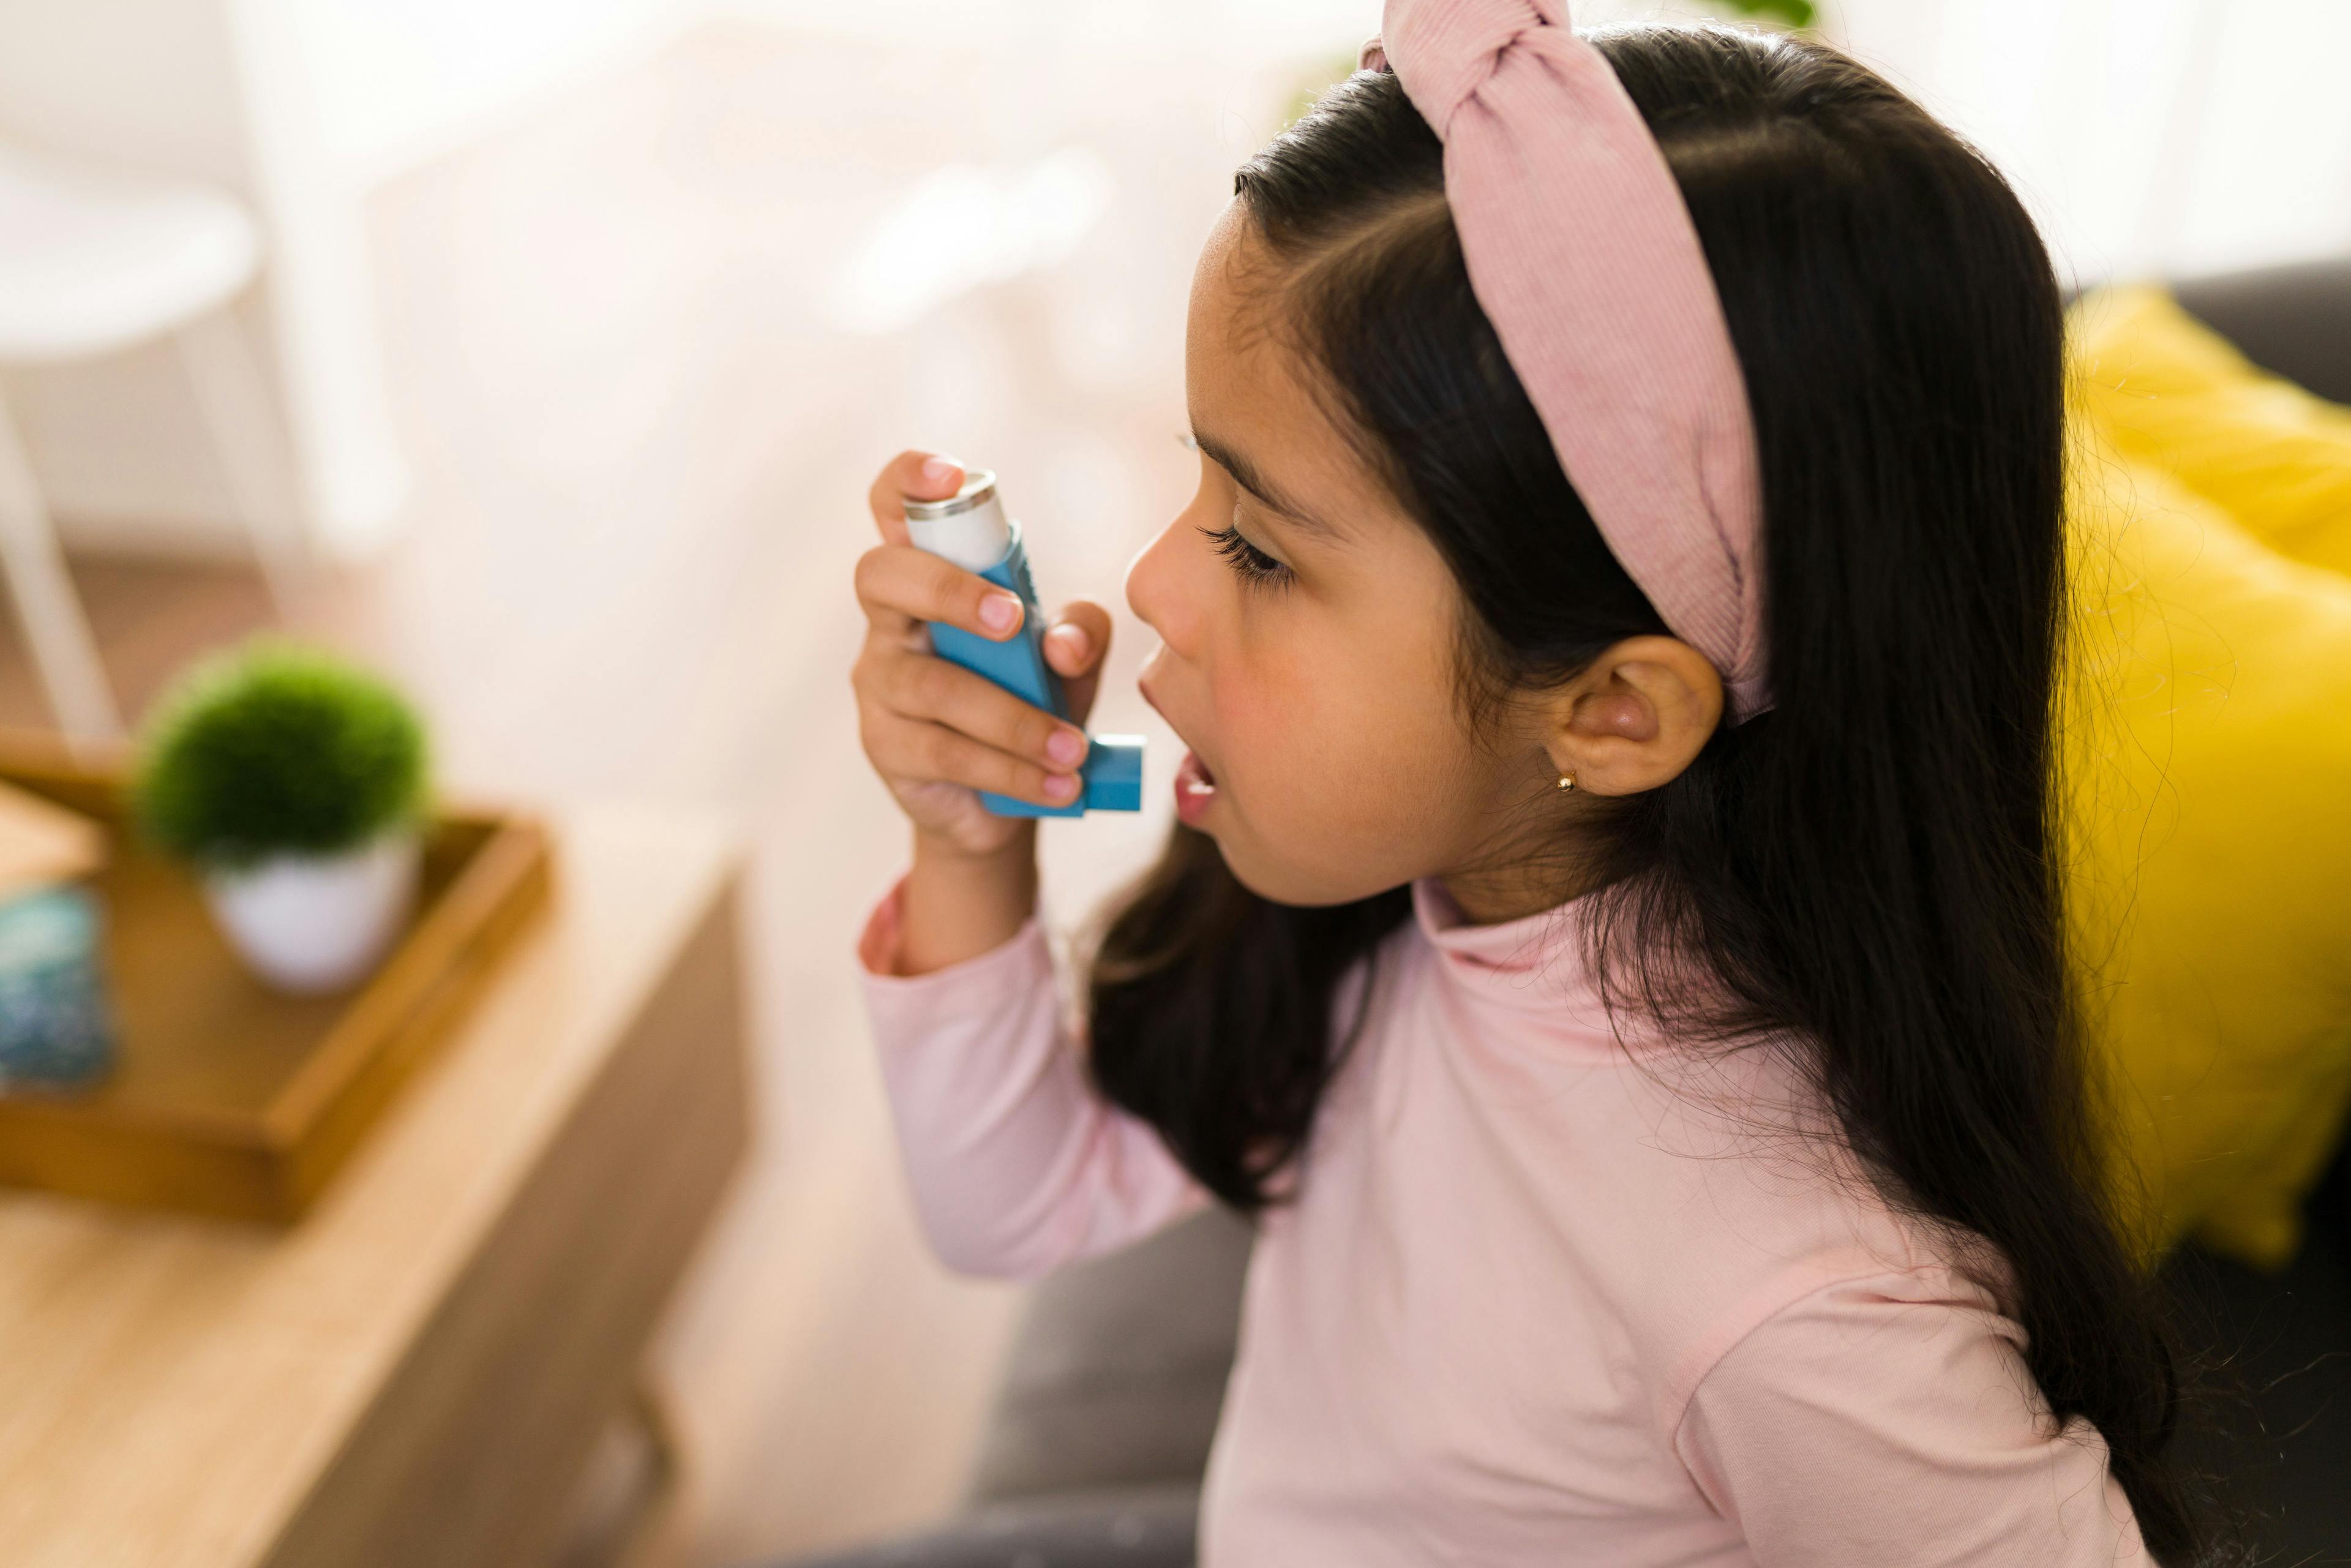 Asthma Diagnoses Among Children Halved During COVID-19 Pandemic